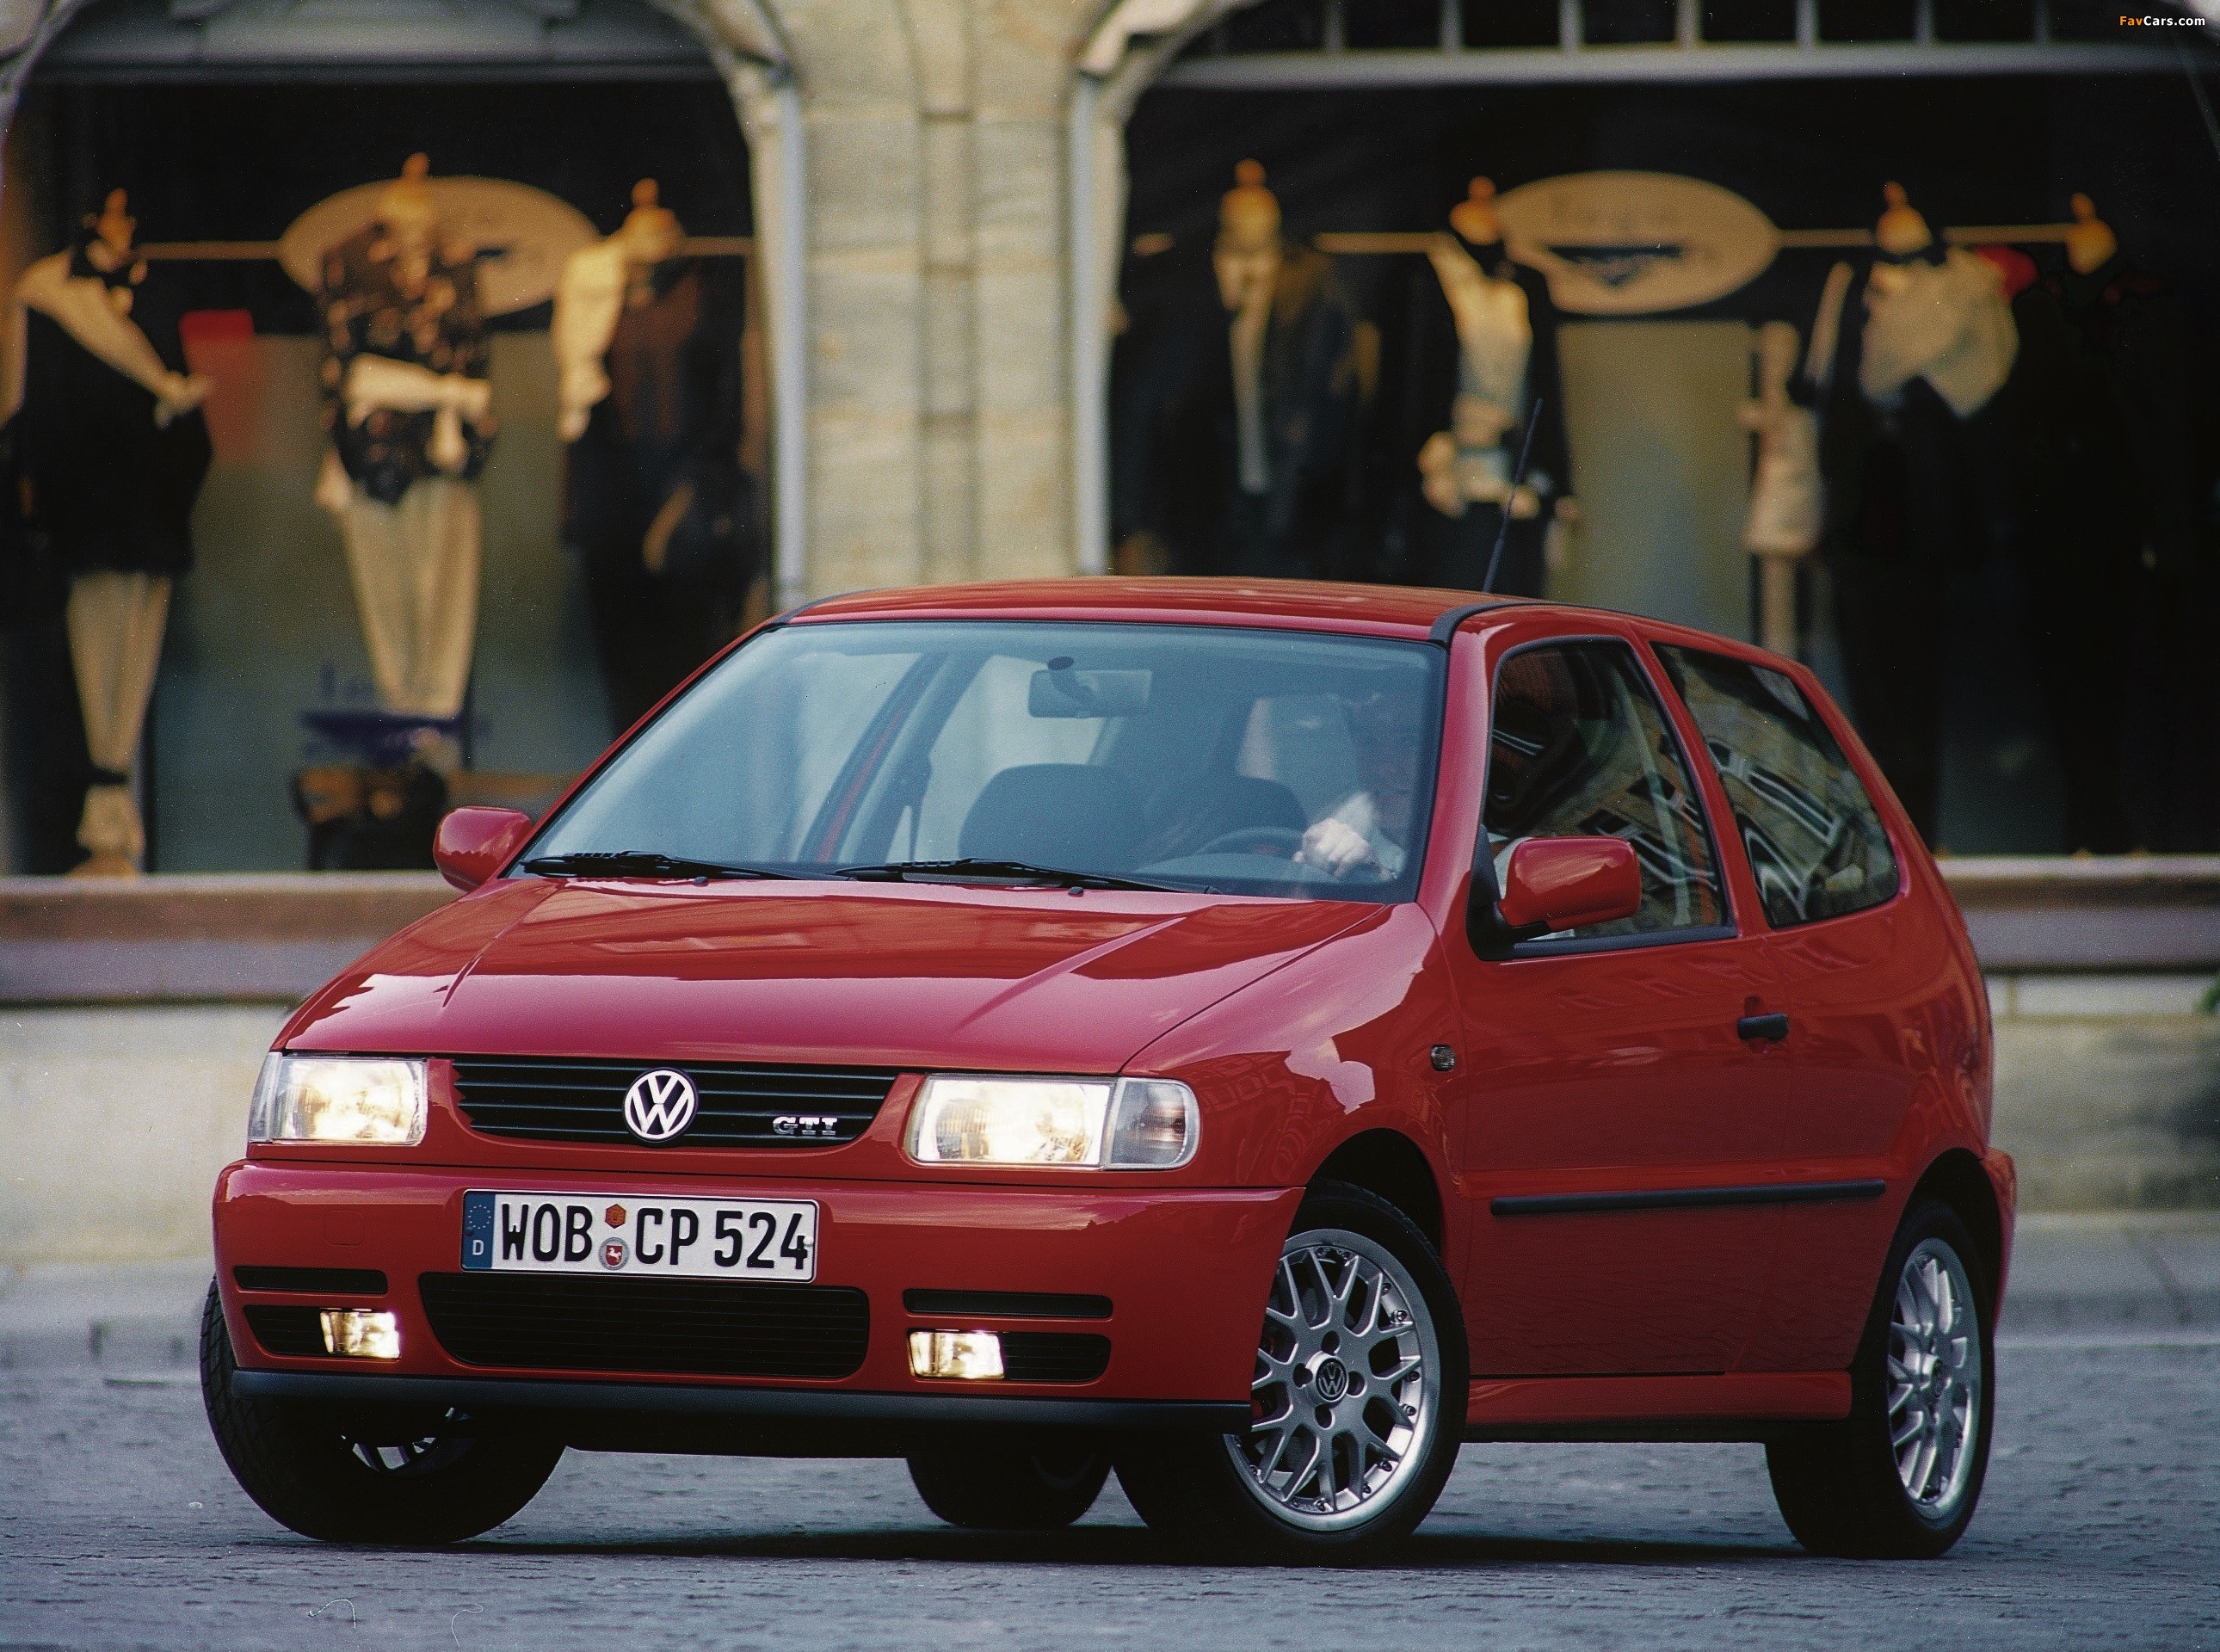 Volkswagen Polo GTI (Typ 6N) 1998–1999 images (2580 x 1920)